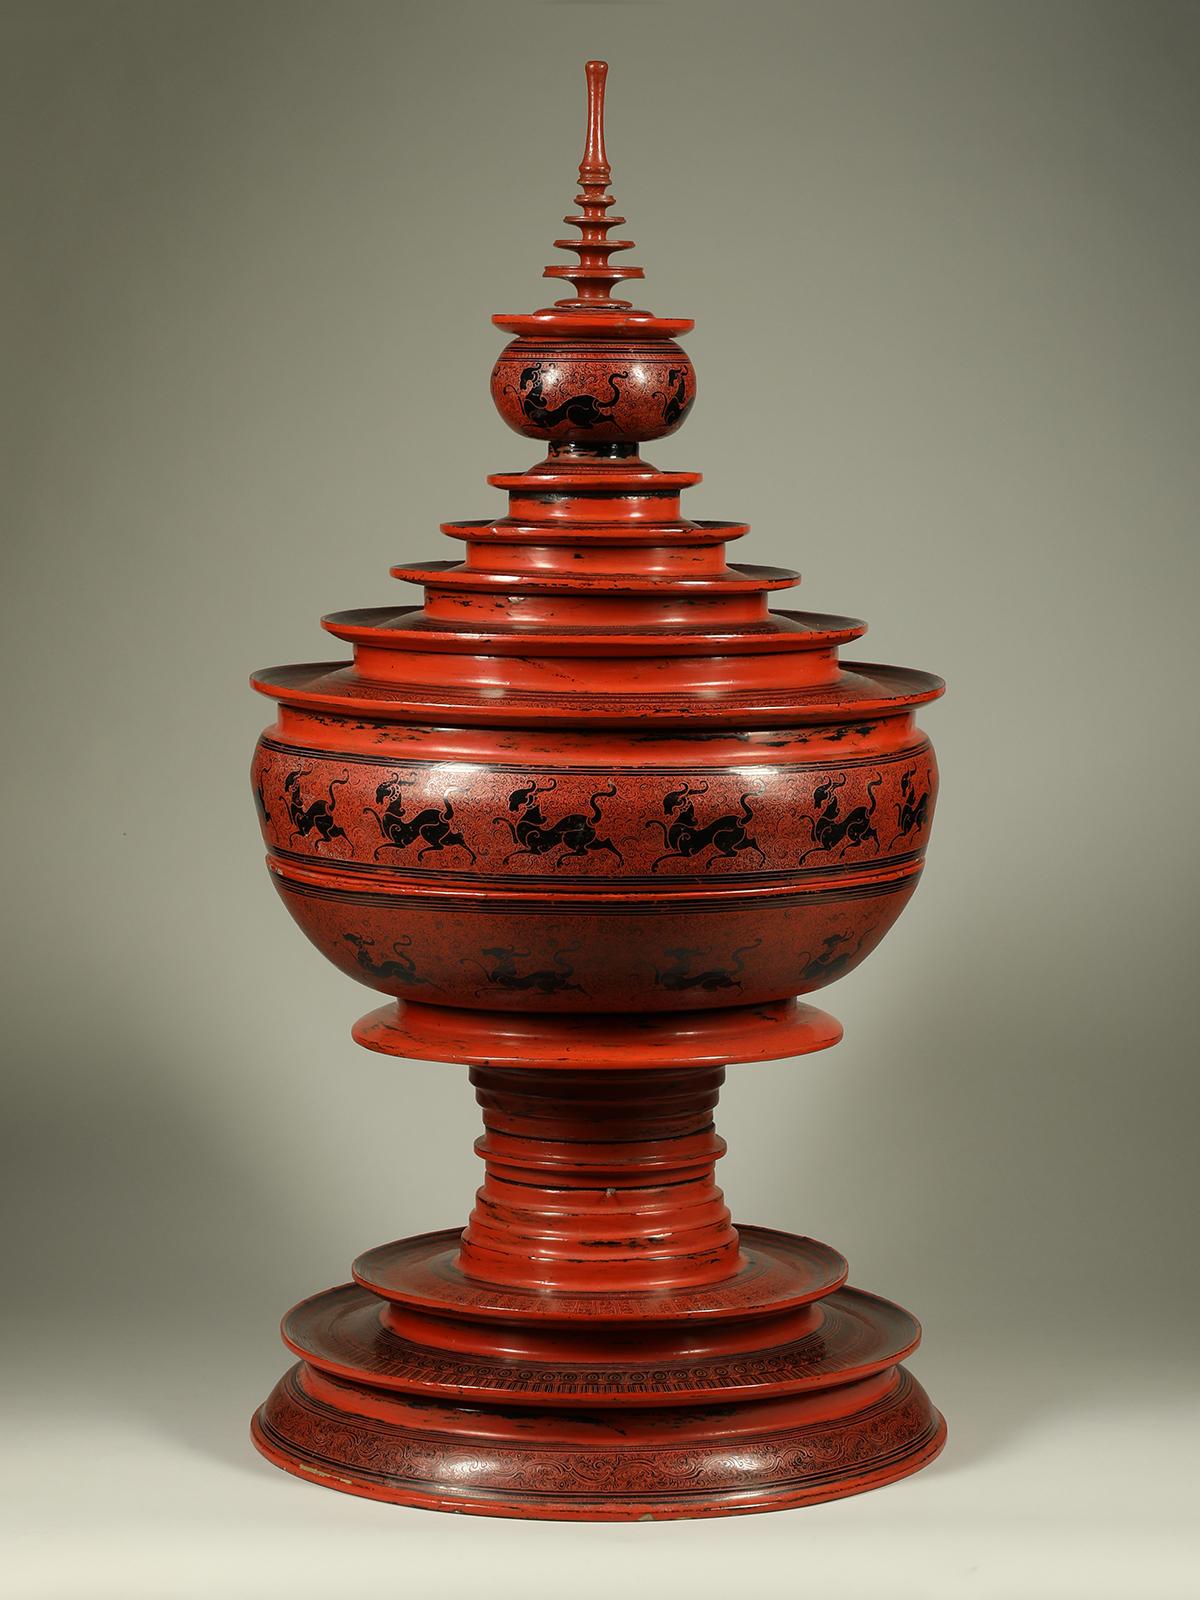 Late 19th or early 20th century lacquer and bamboo offering vessel, Hsun Ok, Pagan, Burma

A large offering vessel composed of four pieces, a base, a large food bowl with lid and the finial. Two rows of high-stepping mythological beasts embellish